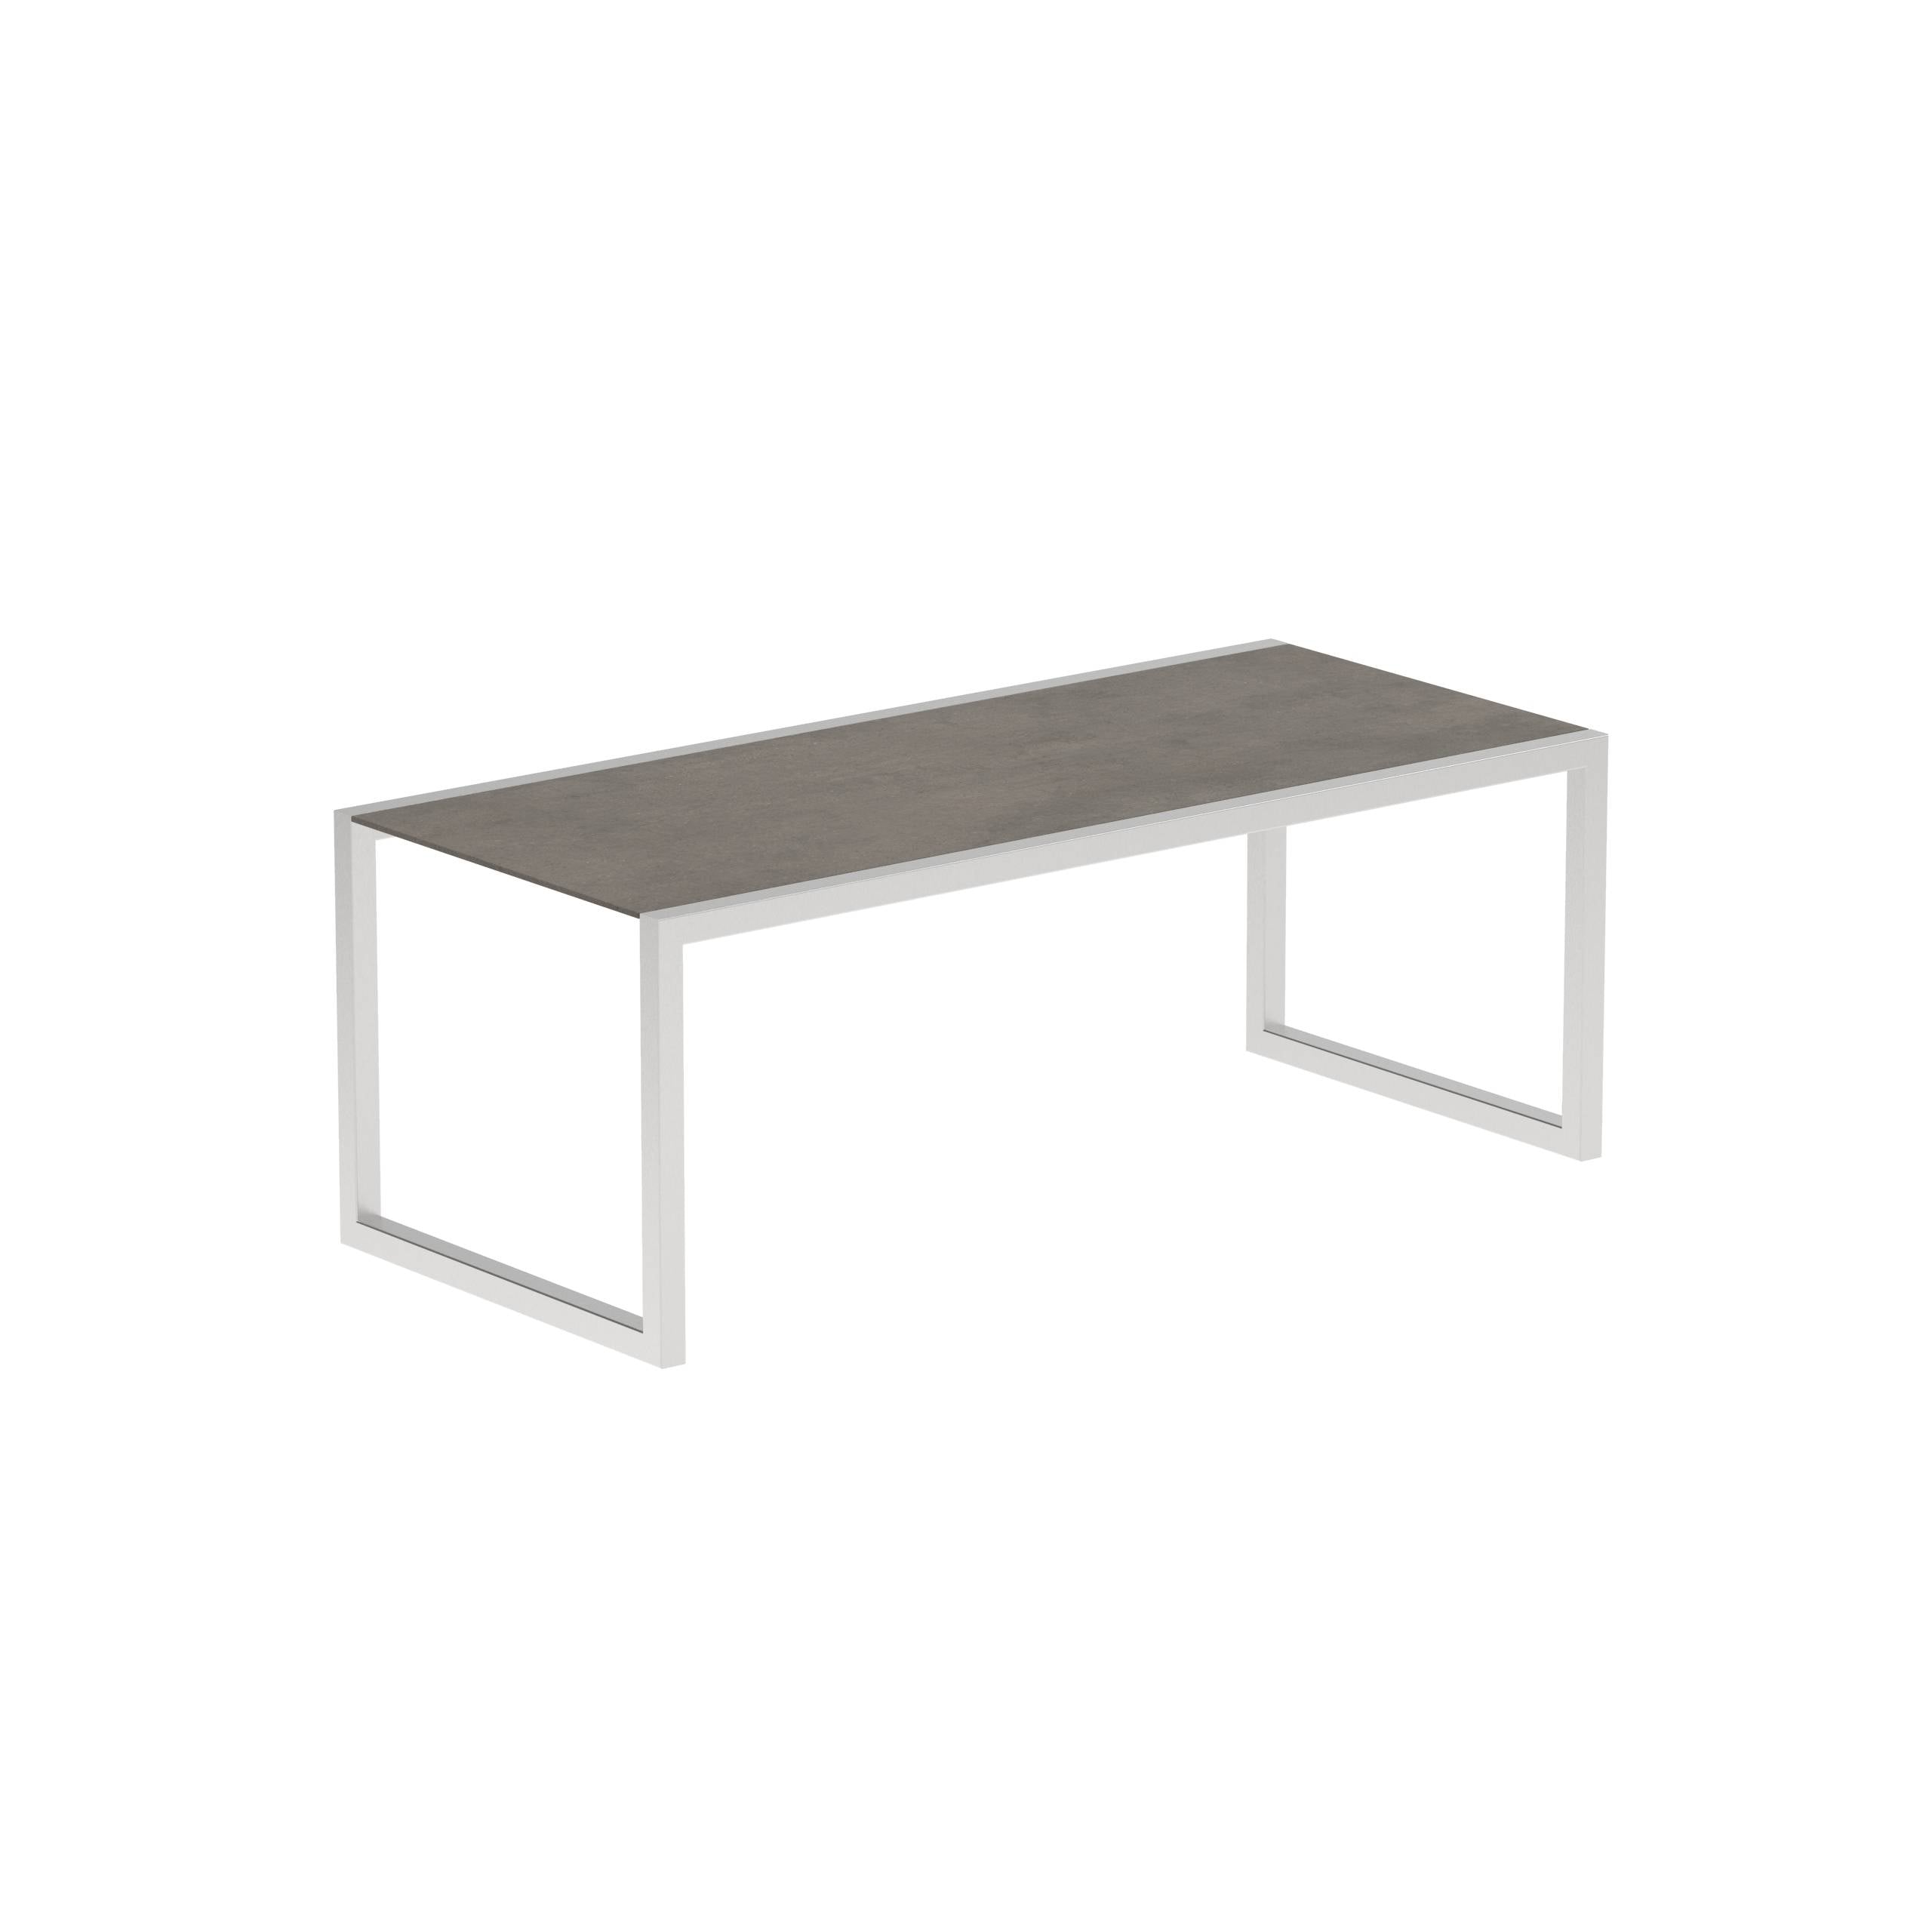 Ninix Table 200x90cm With Stainless Steel And Ceramic Terra Marrone